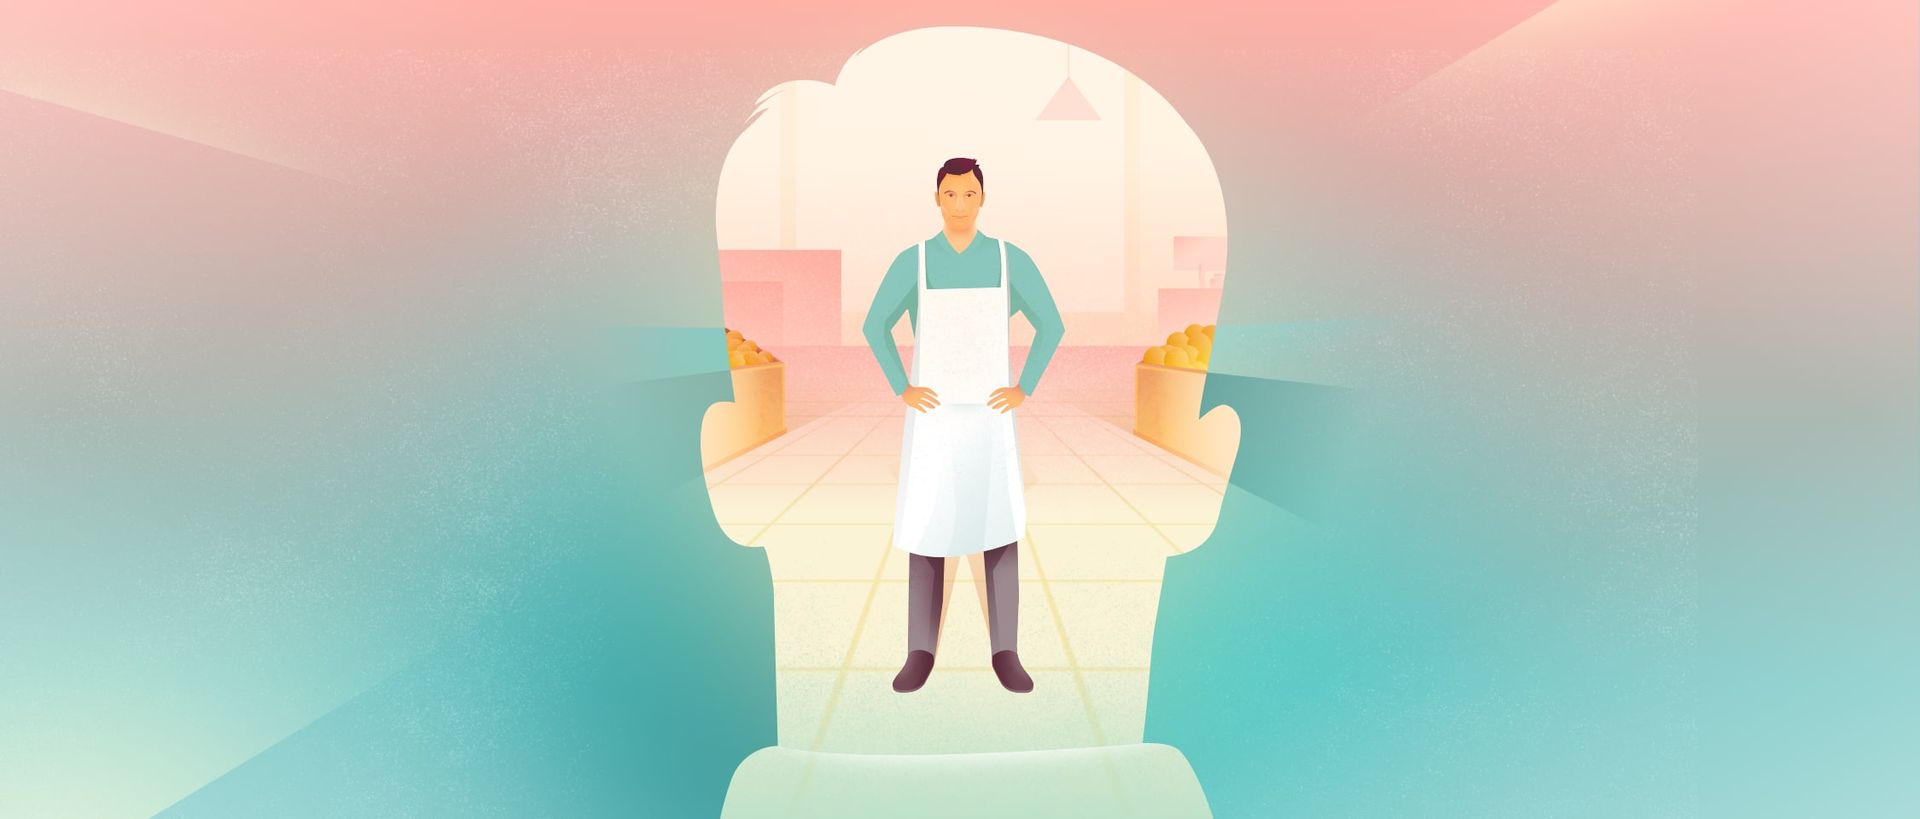 Shape of a man's head with a standing man wearing apron inside